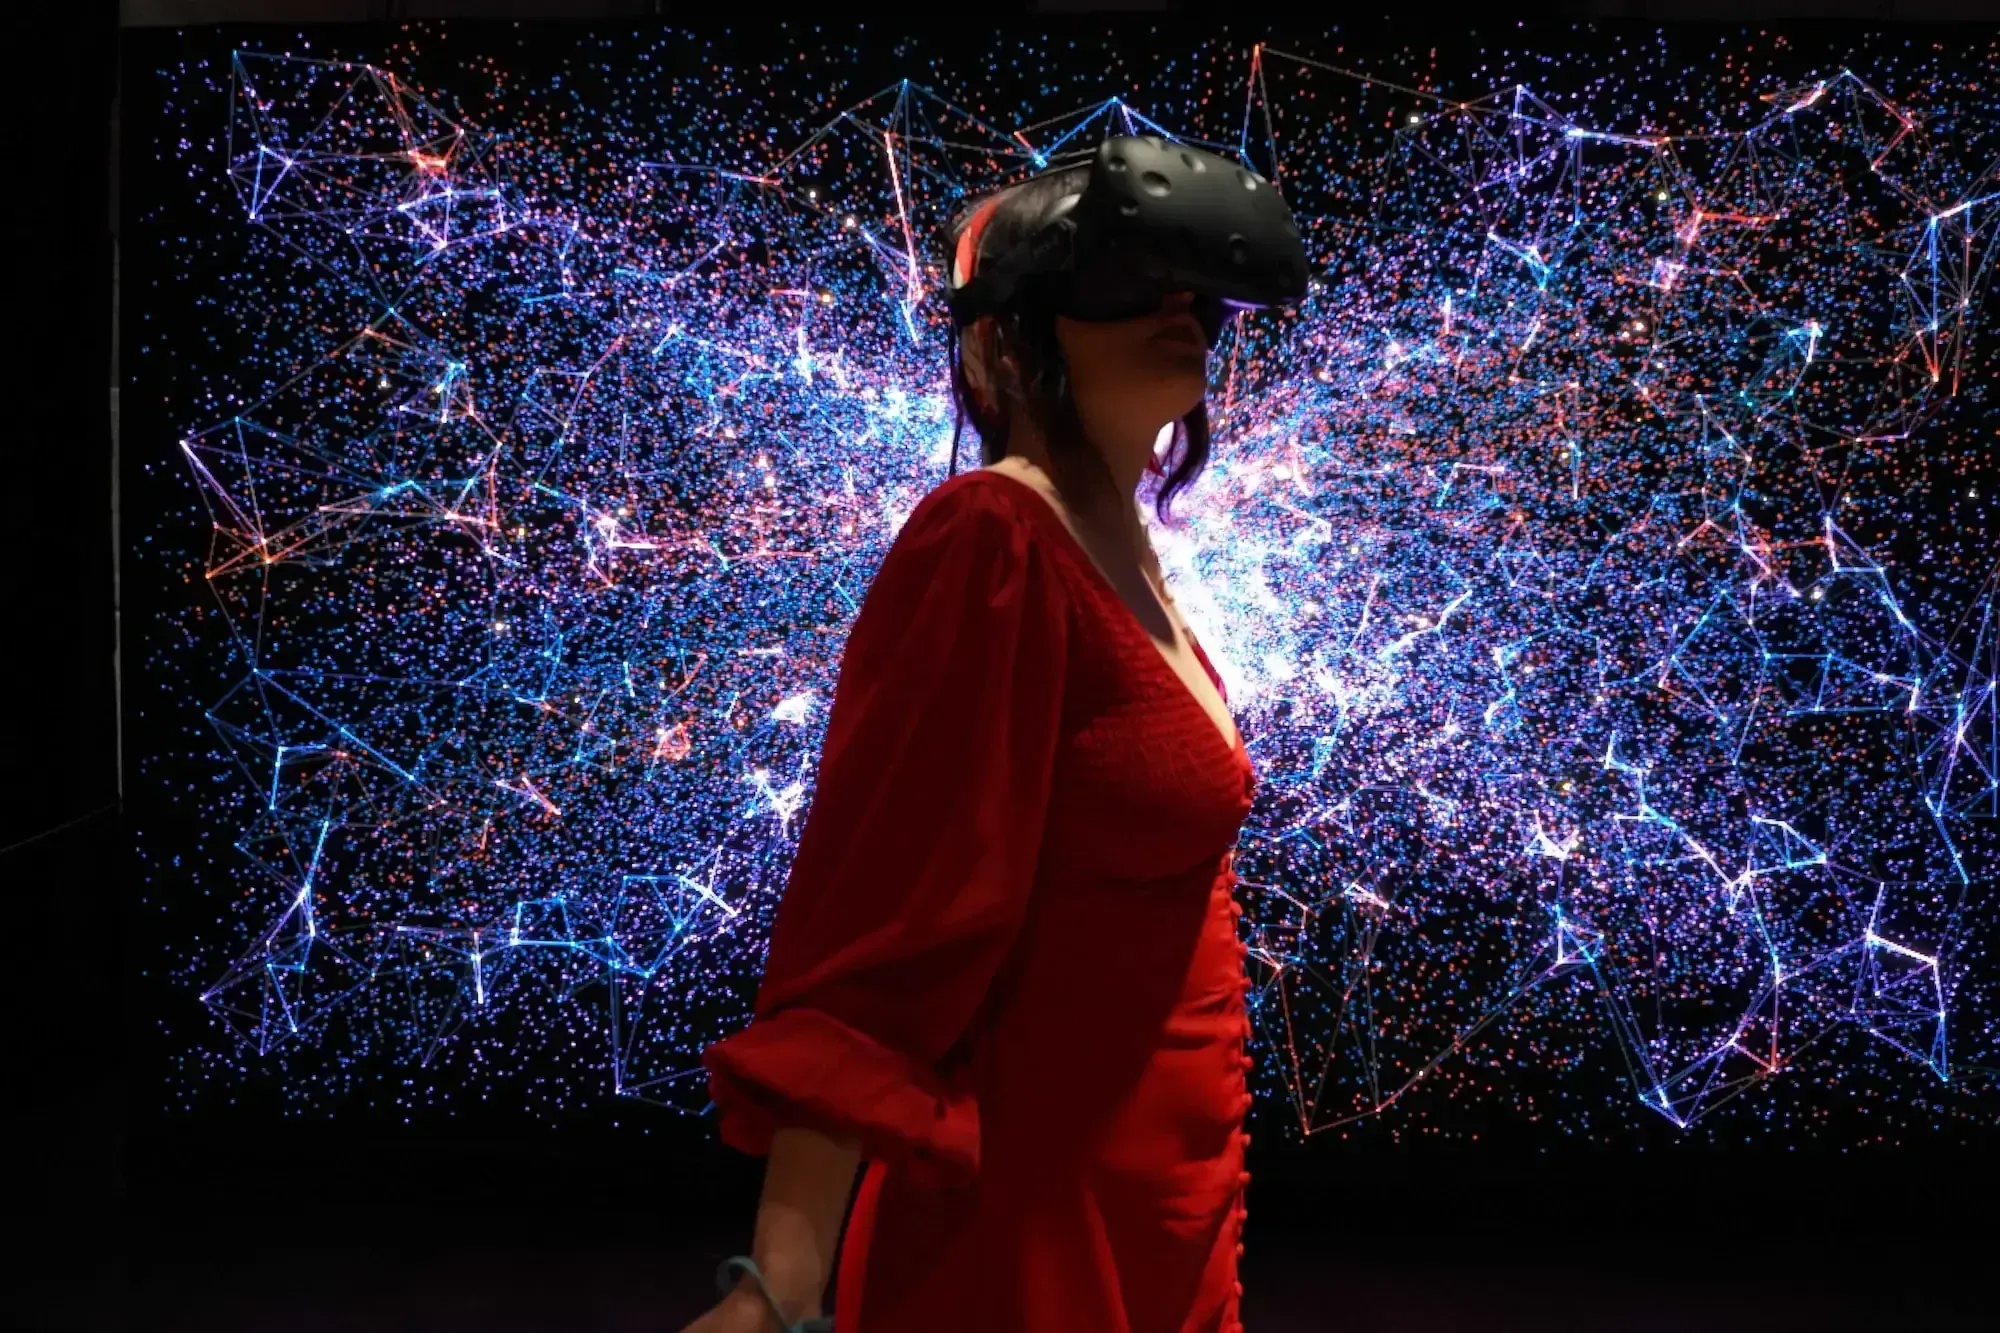 Woman in red dress with VR glasses on in a dark room full of colourful light spots.